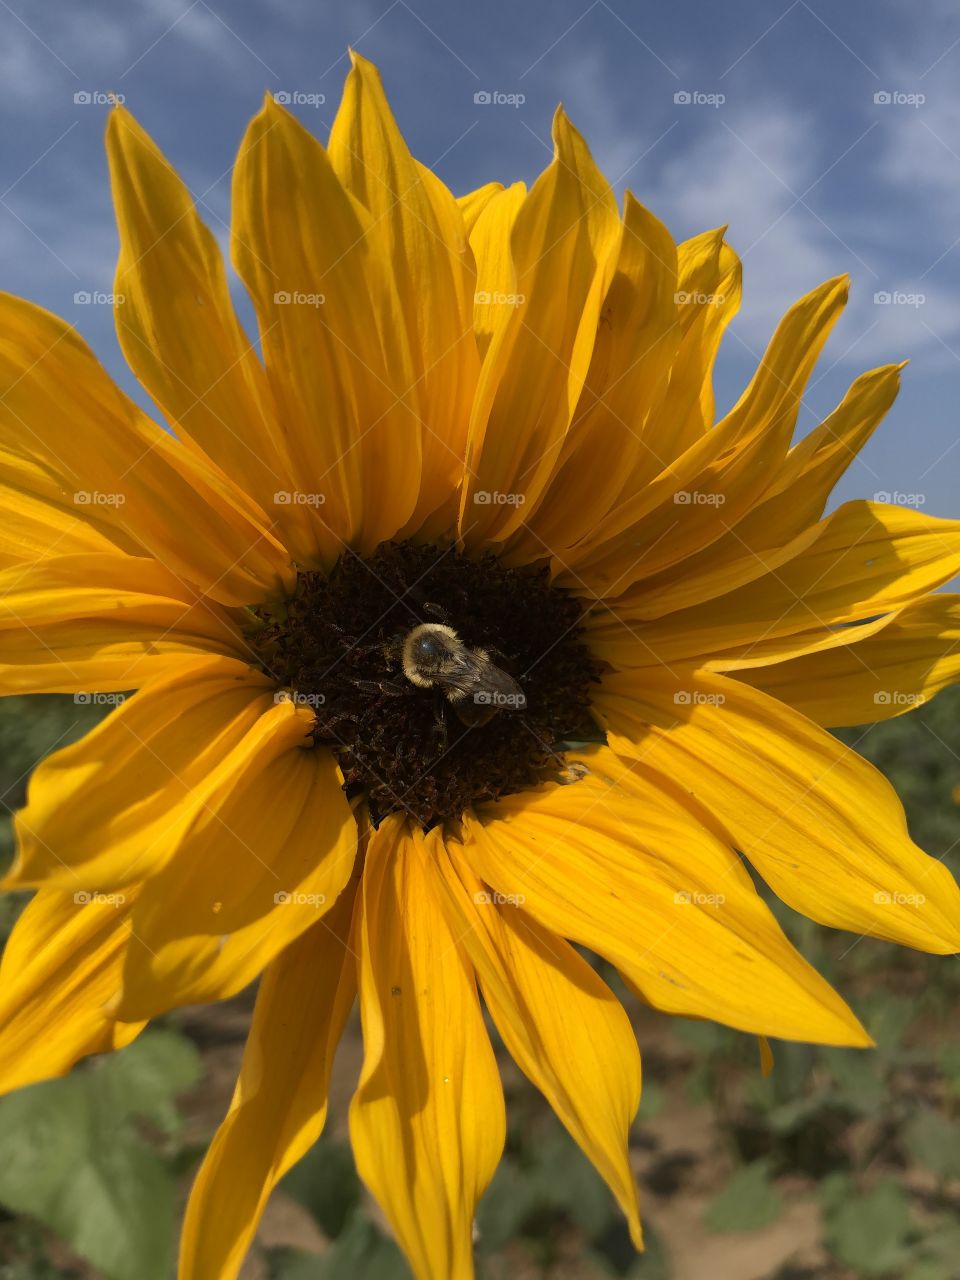 Sunflower bloom and a bumble bee 